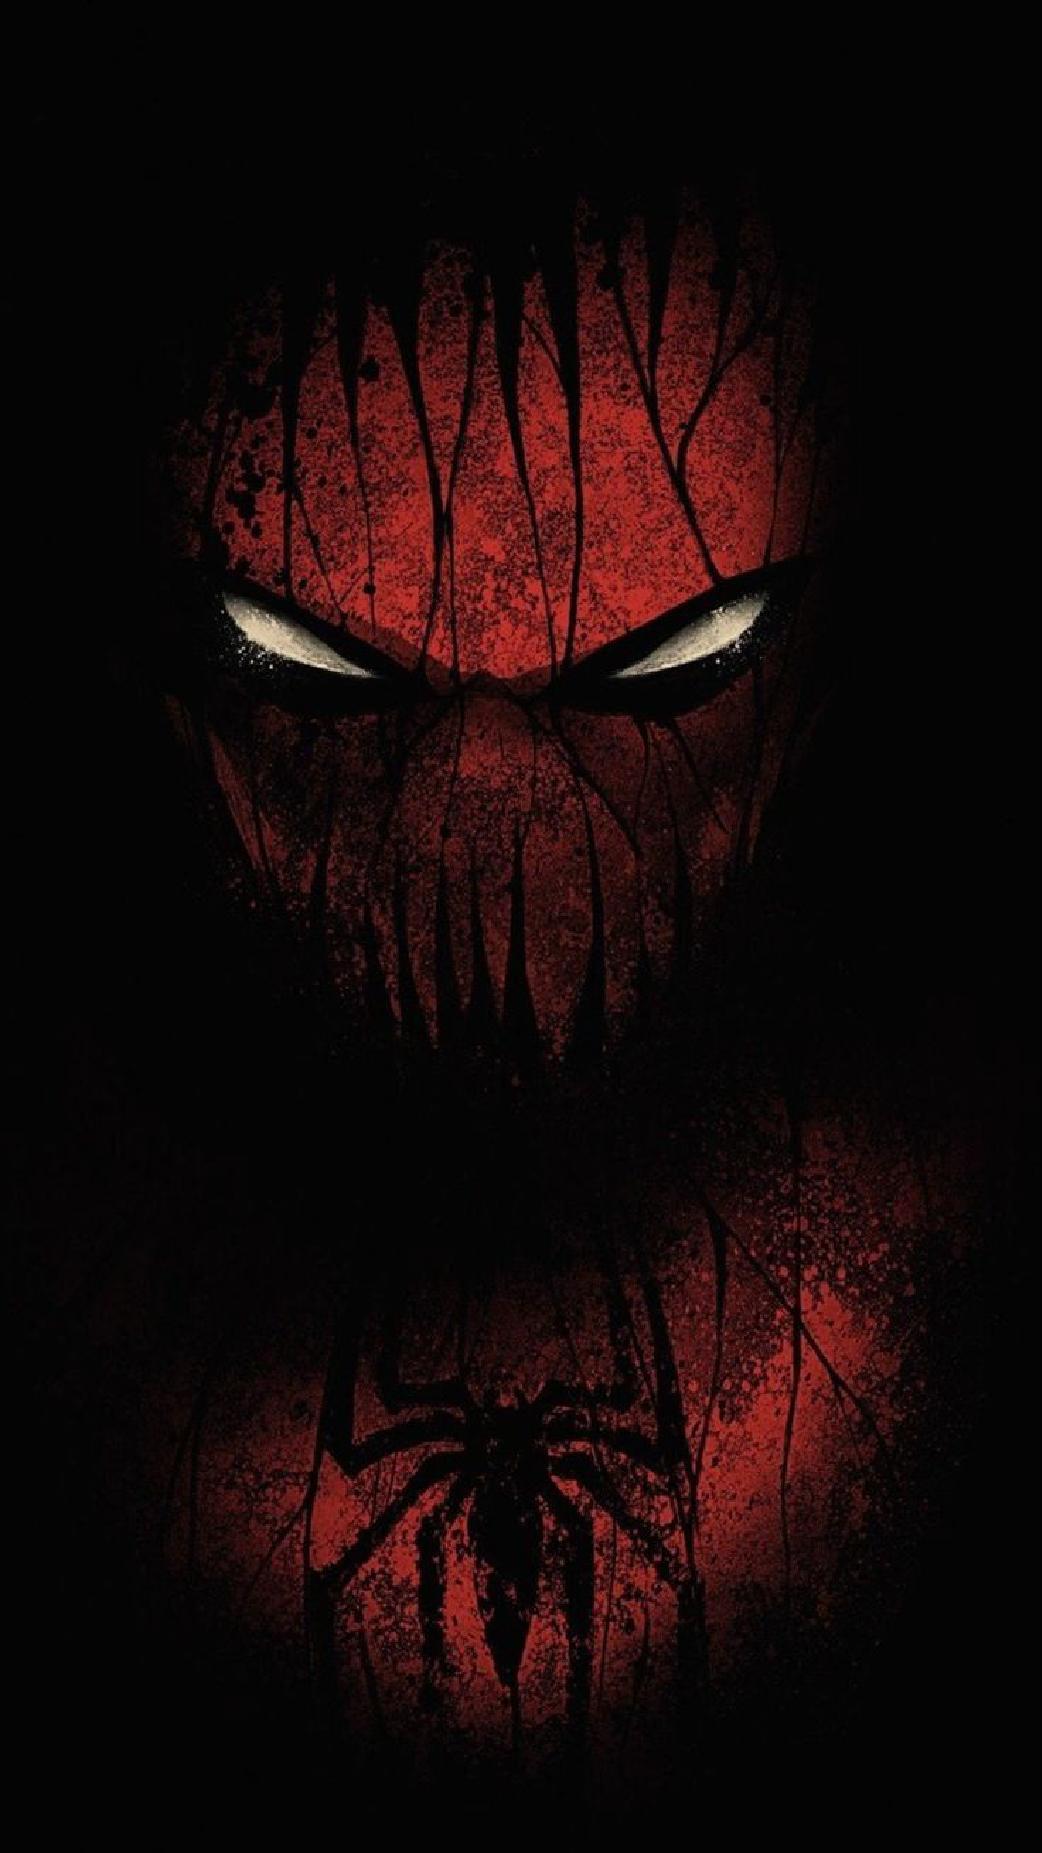 Best Spiderman Wallpaper for Android